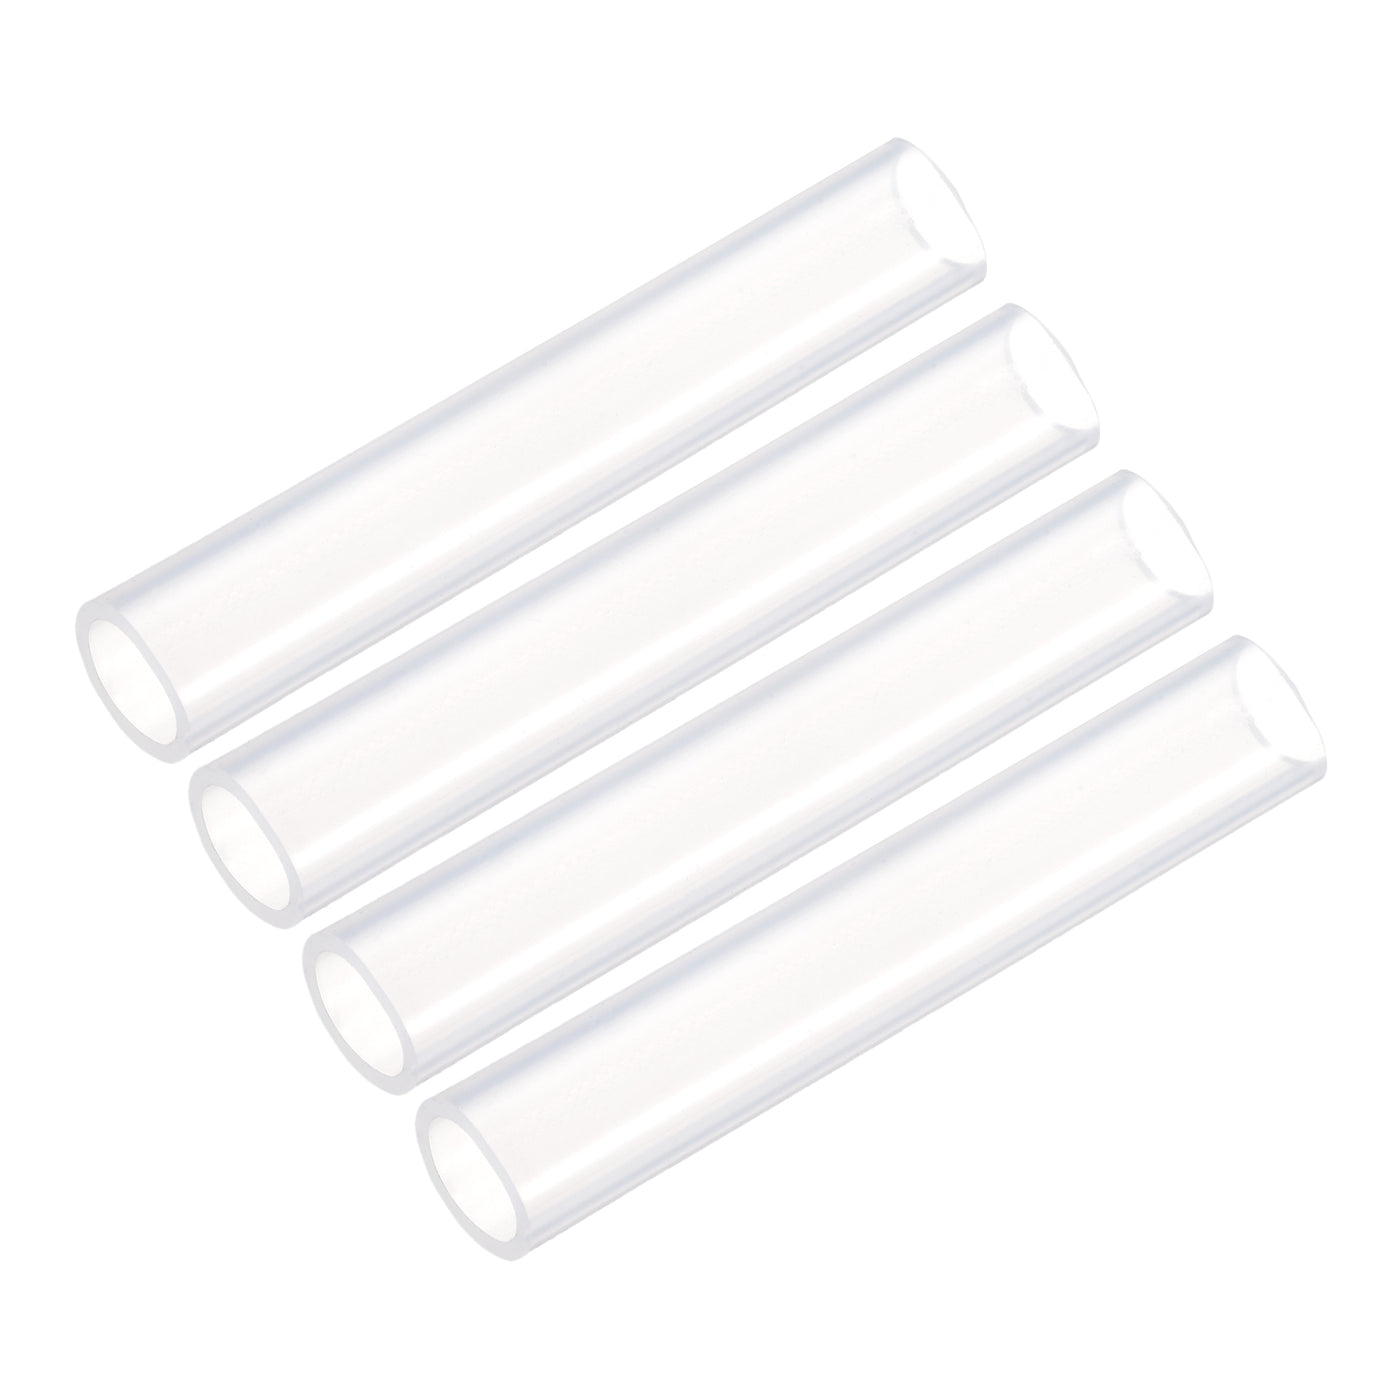 uxcell Uxcell Silicone Tubing 12mm ID,16mm OD 4Pcs 0.33 Ft for Pump Transfer, Transparent